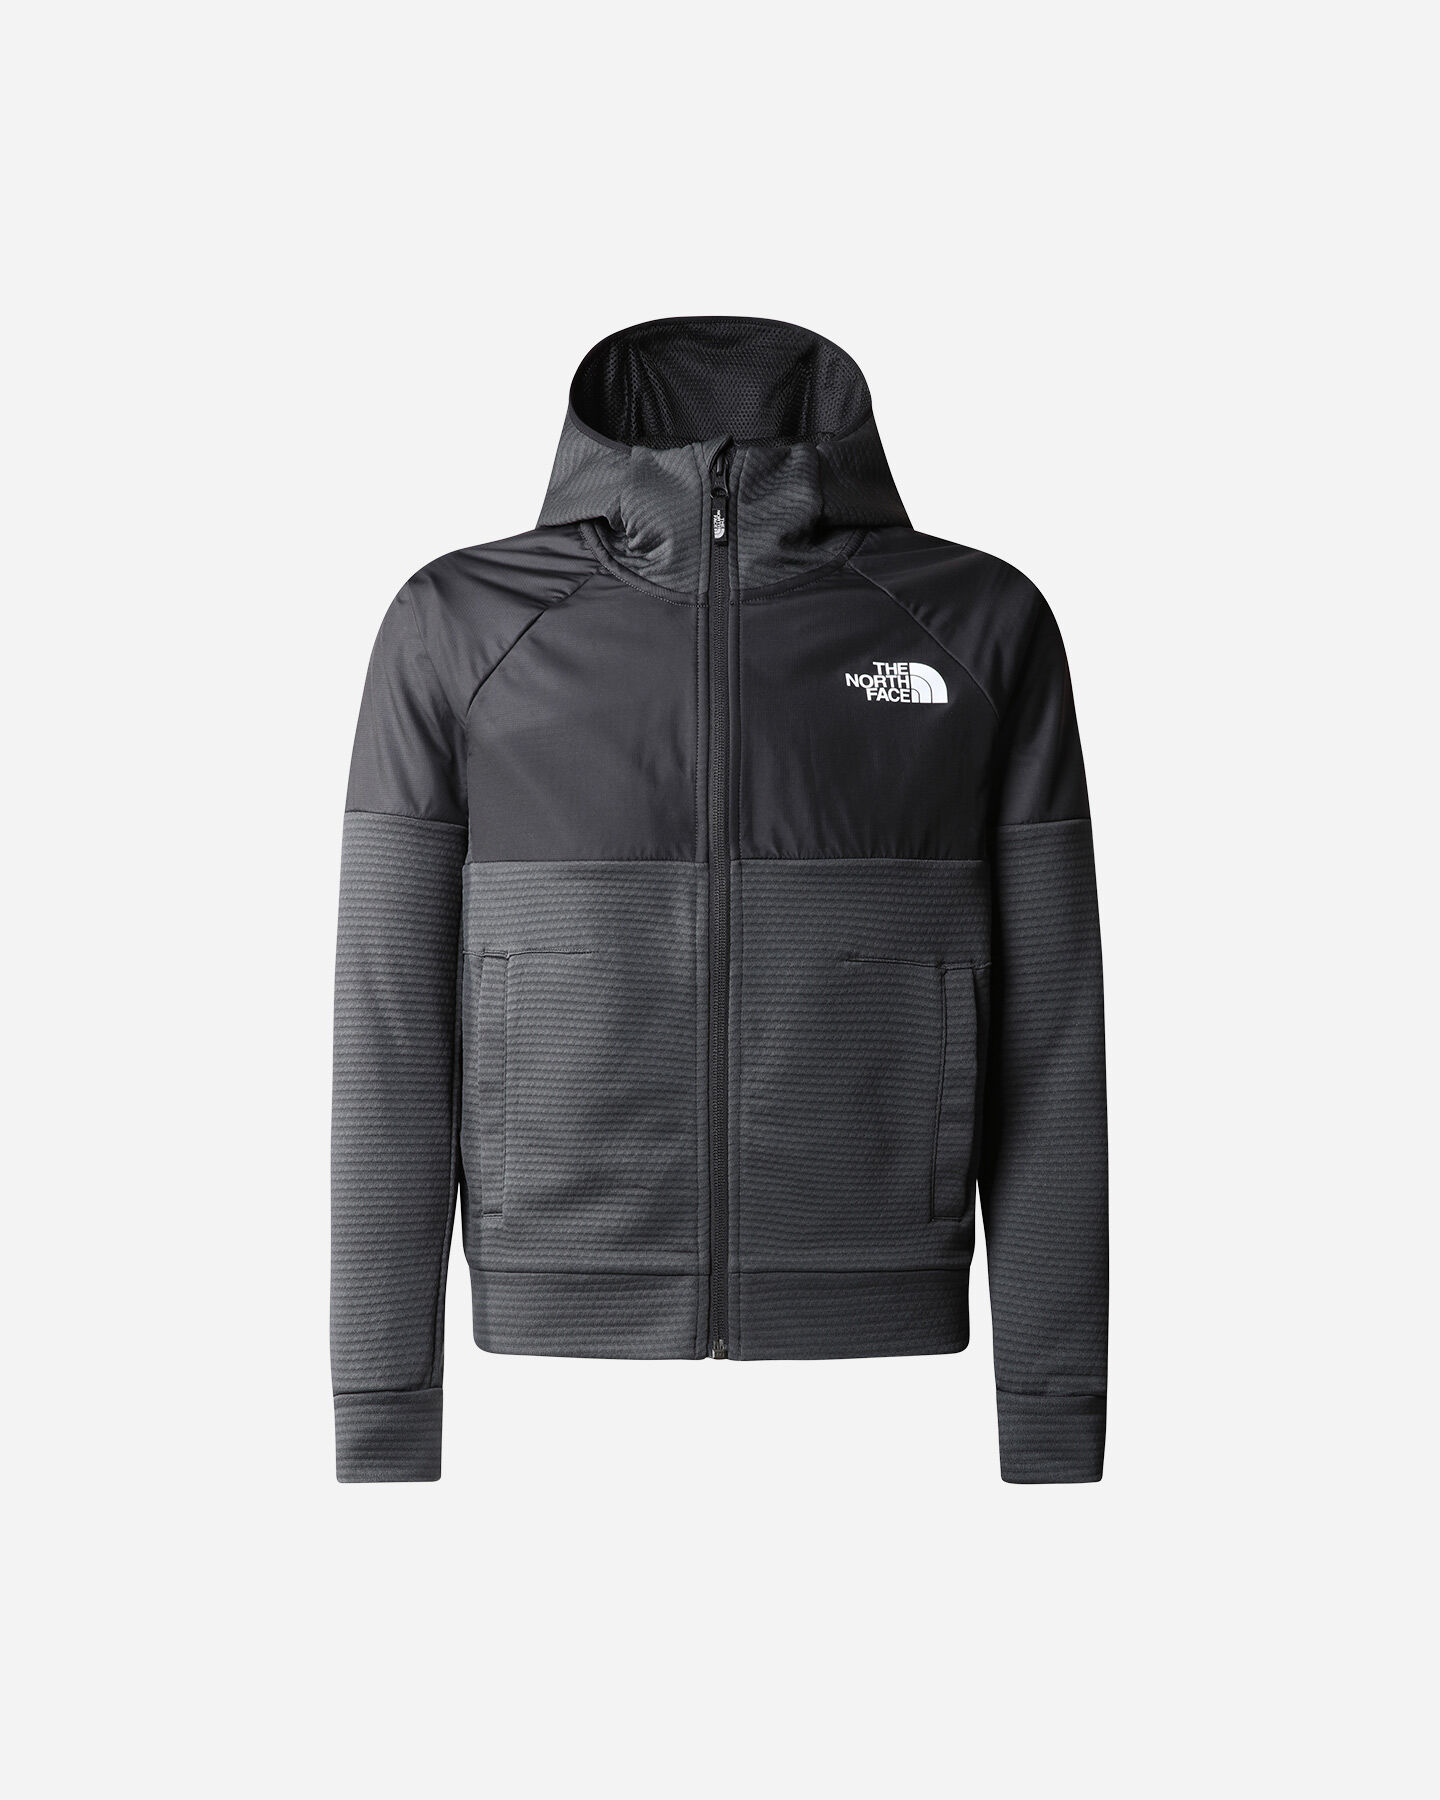  Pile THE NORTH FACE MOUNTAIN ATHLETICS JR S5537320|0C5|S scatto 0